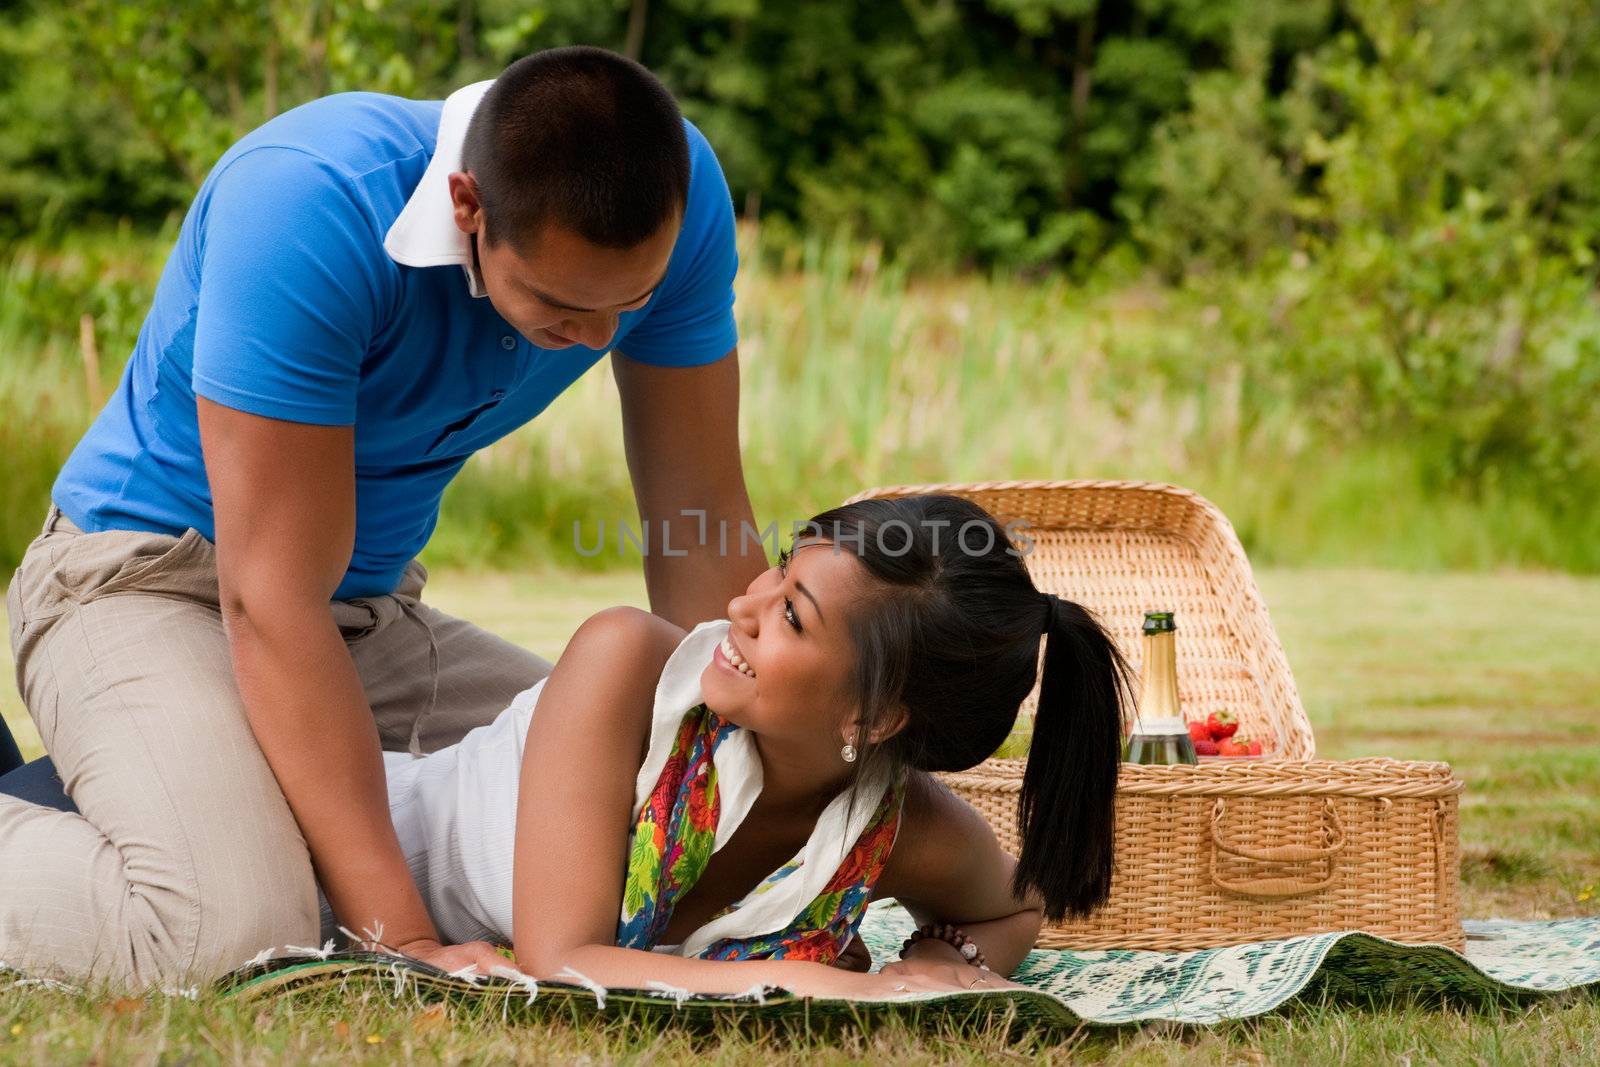 Young happy asian couple enjoying their time outdoors
